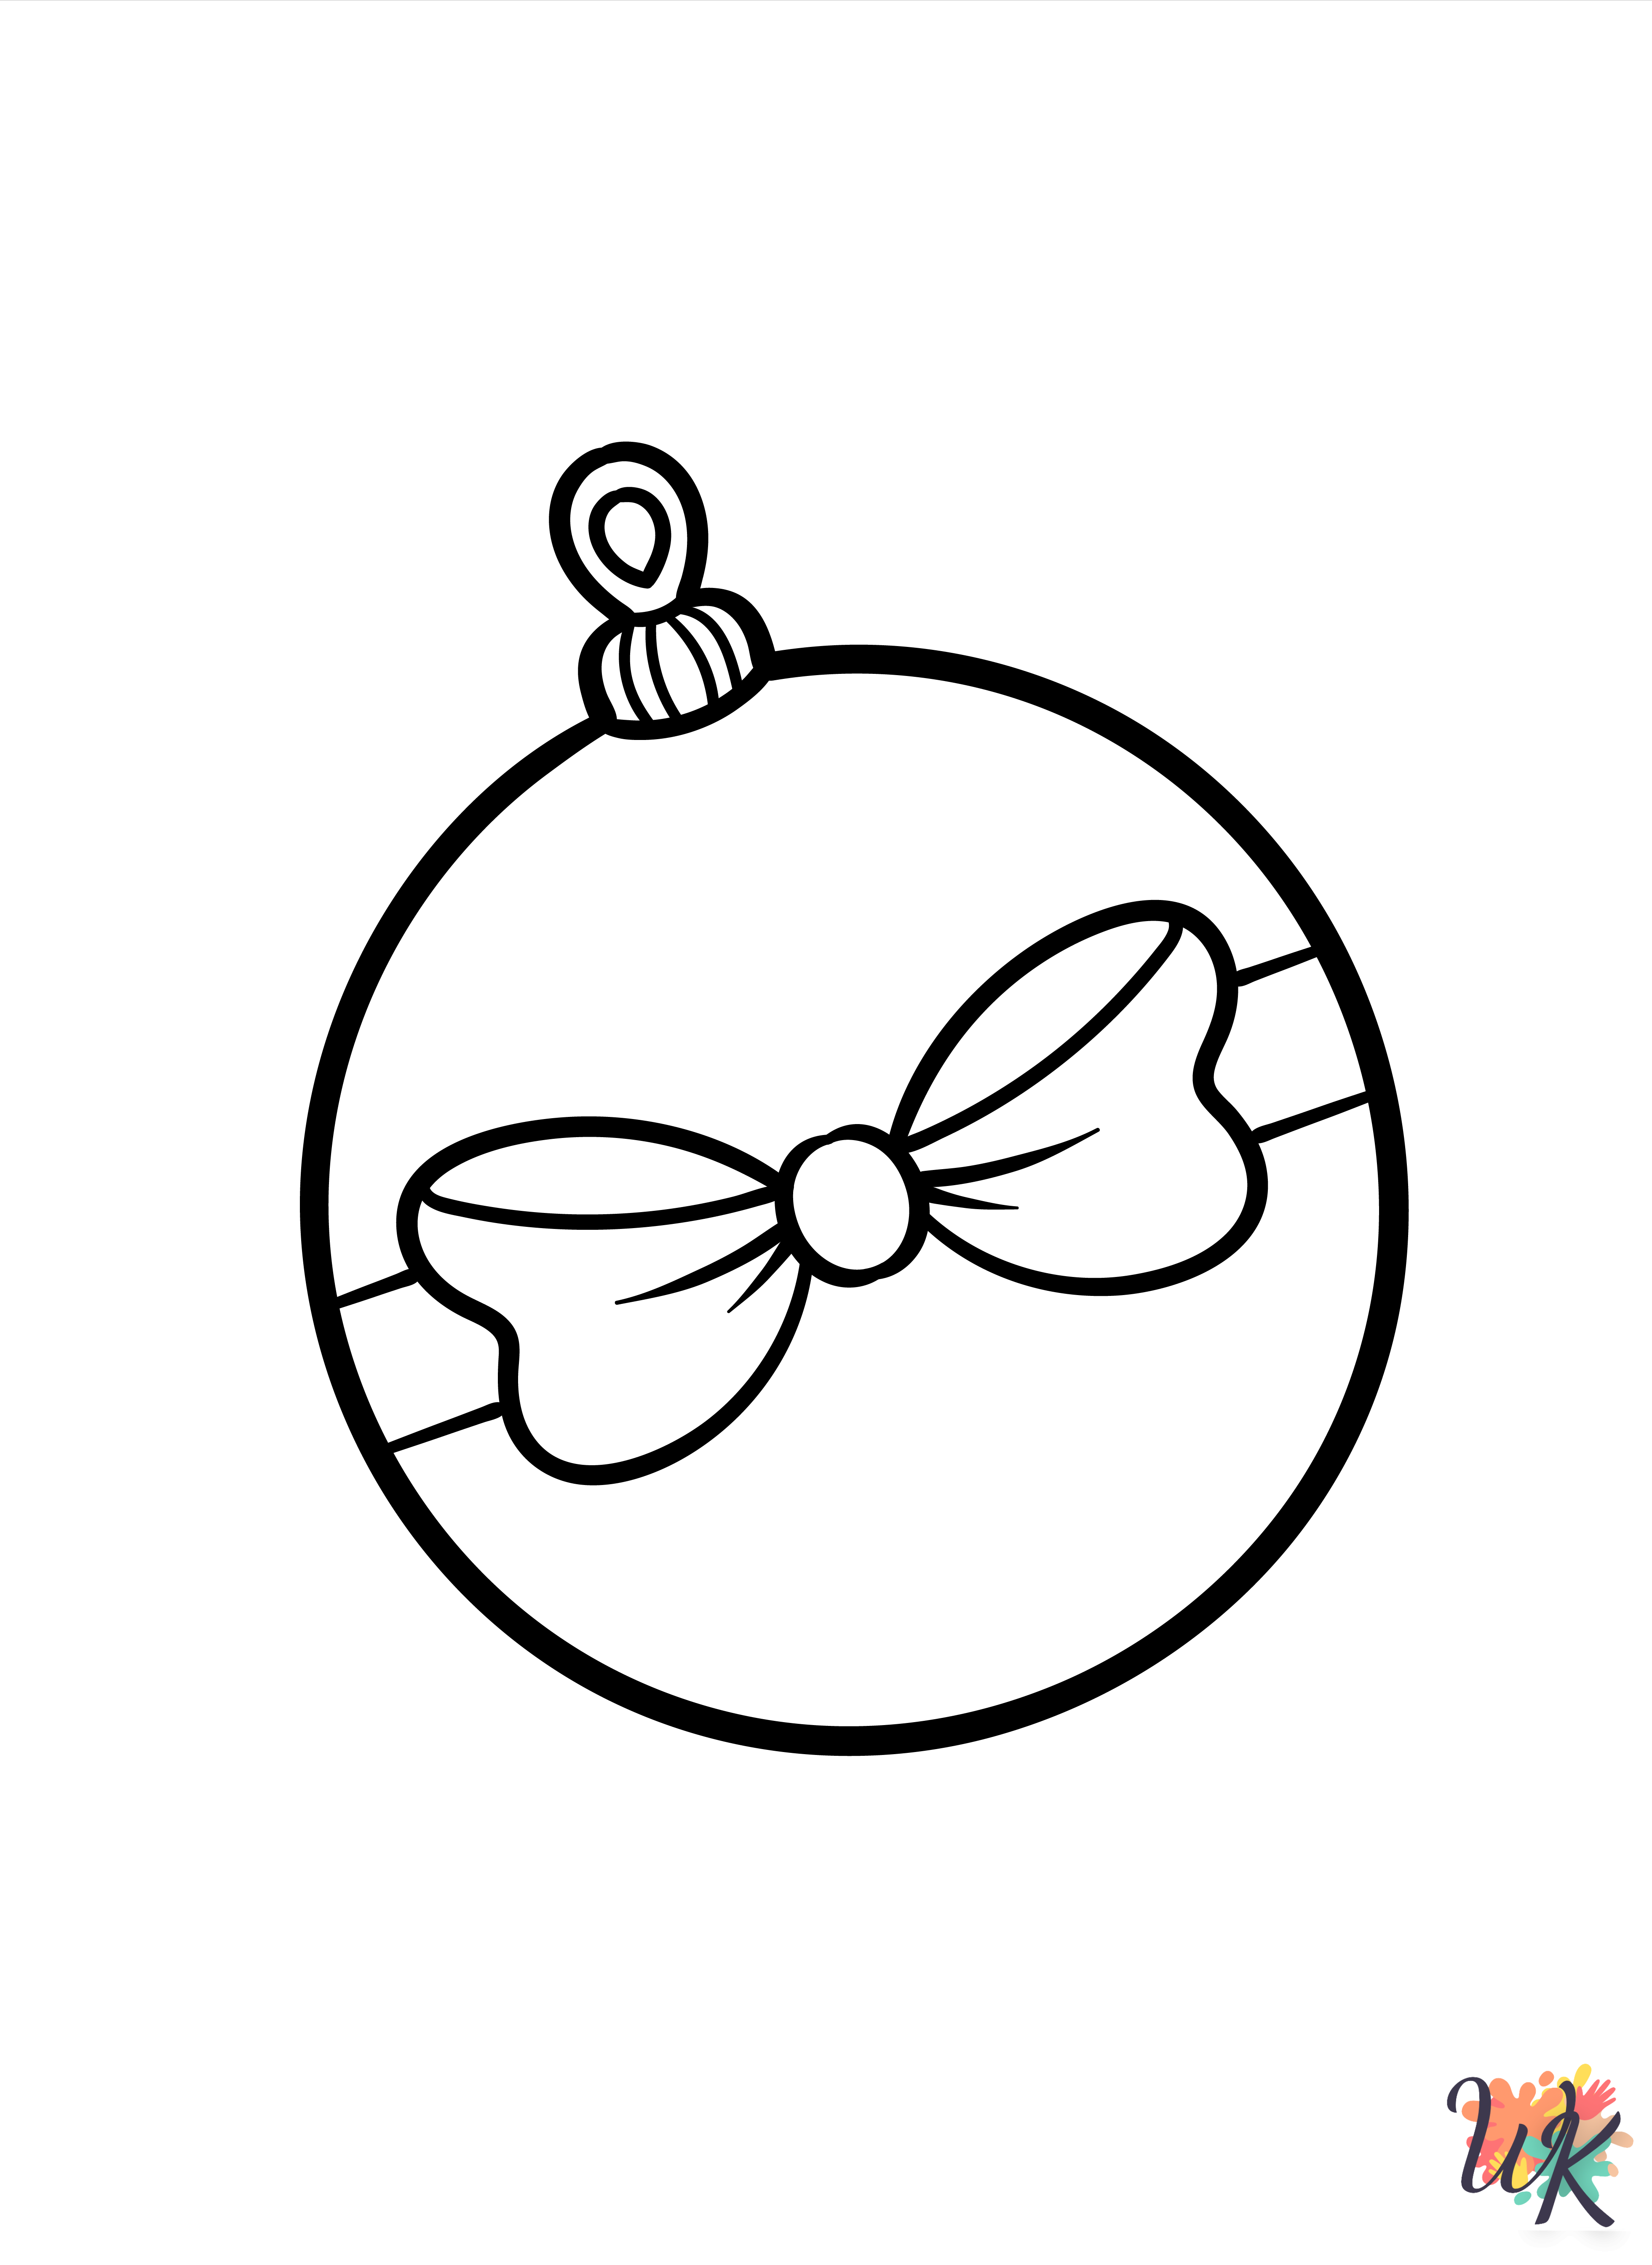 Christmas Ornament themed coloring pages